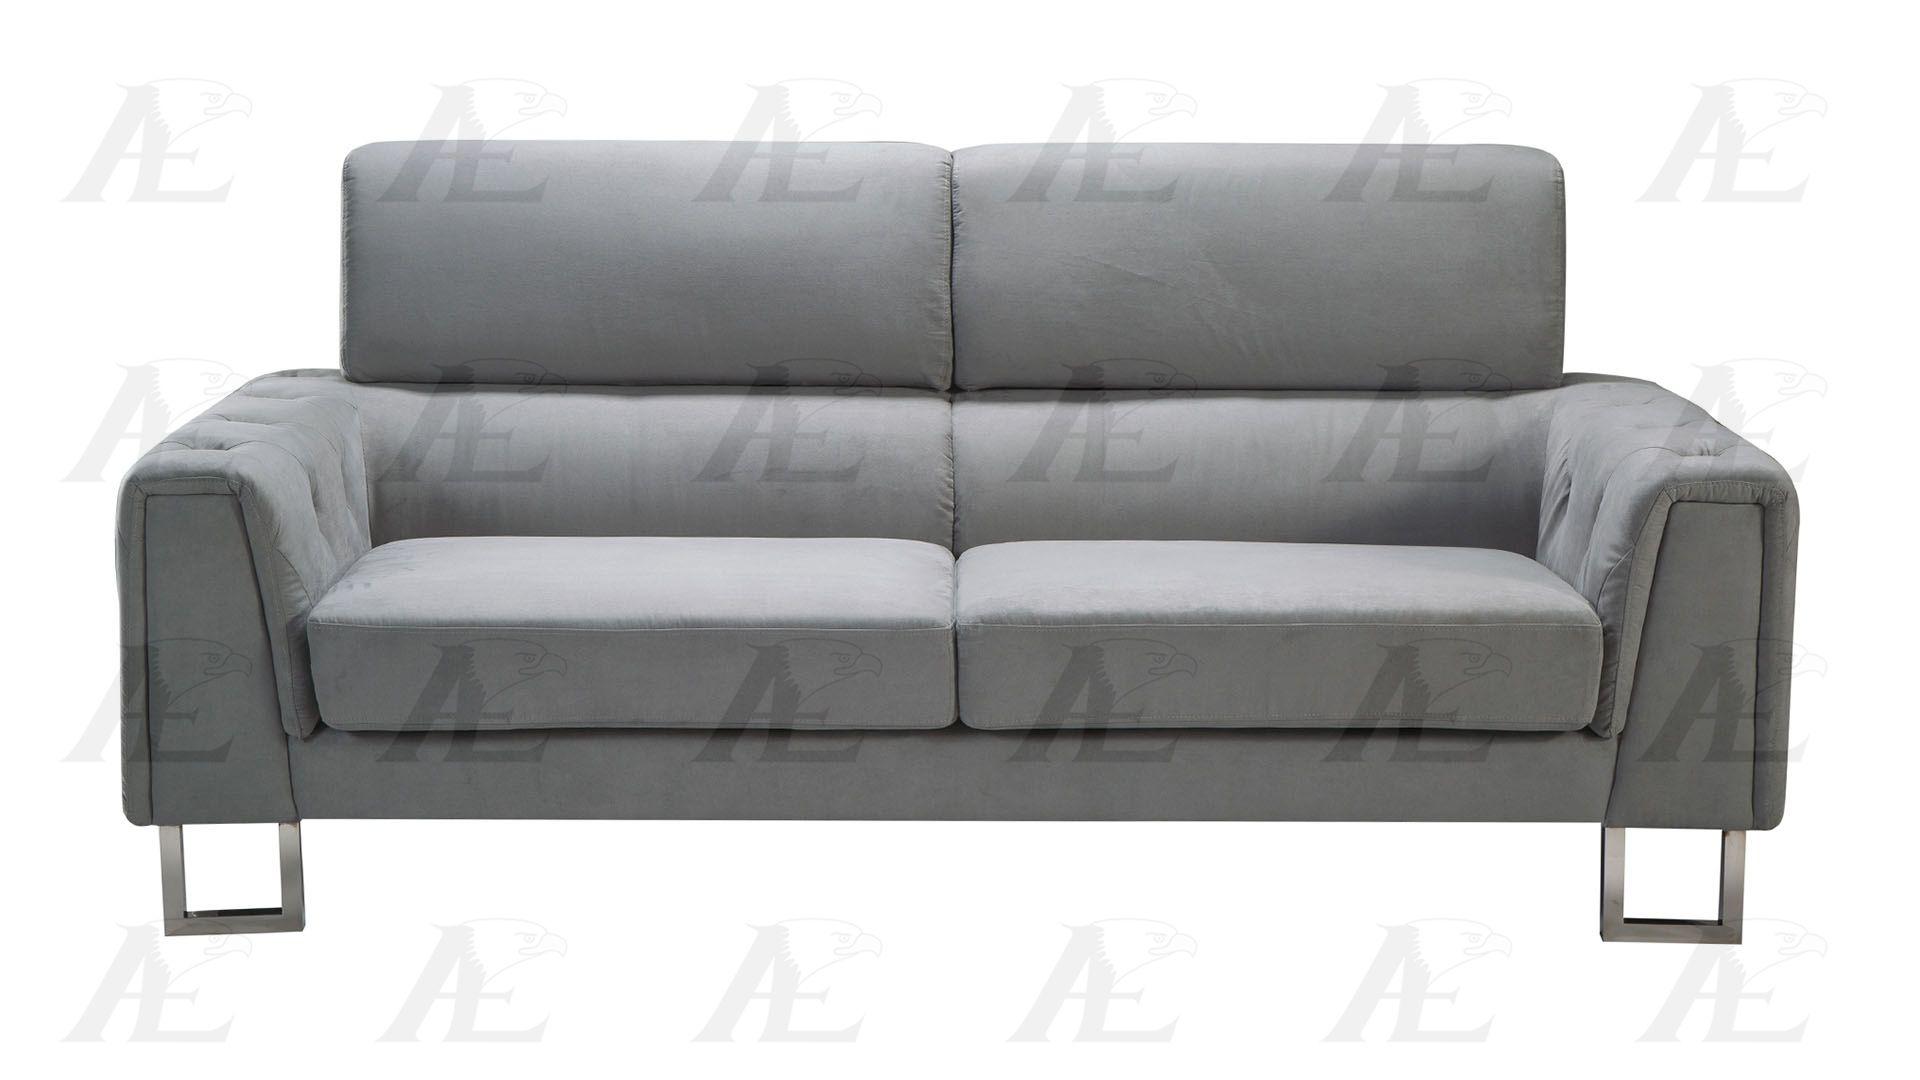 

    
American Eagle Furniture AE2369 Gray Tufted Sofa Loveseat and Chair Set Fabric Modern 3Pcs
